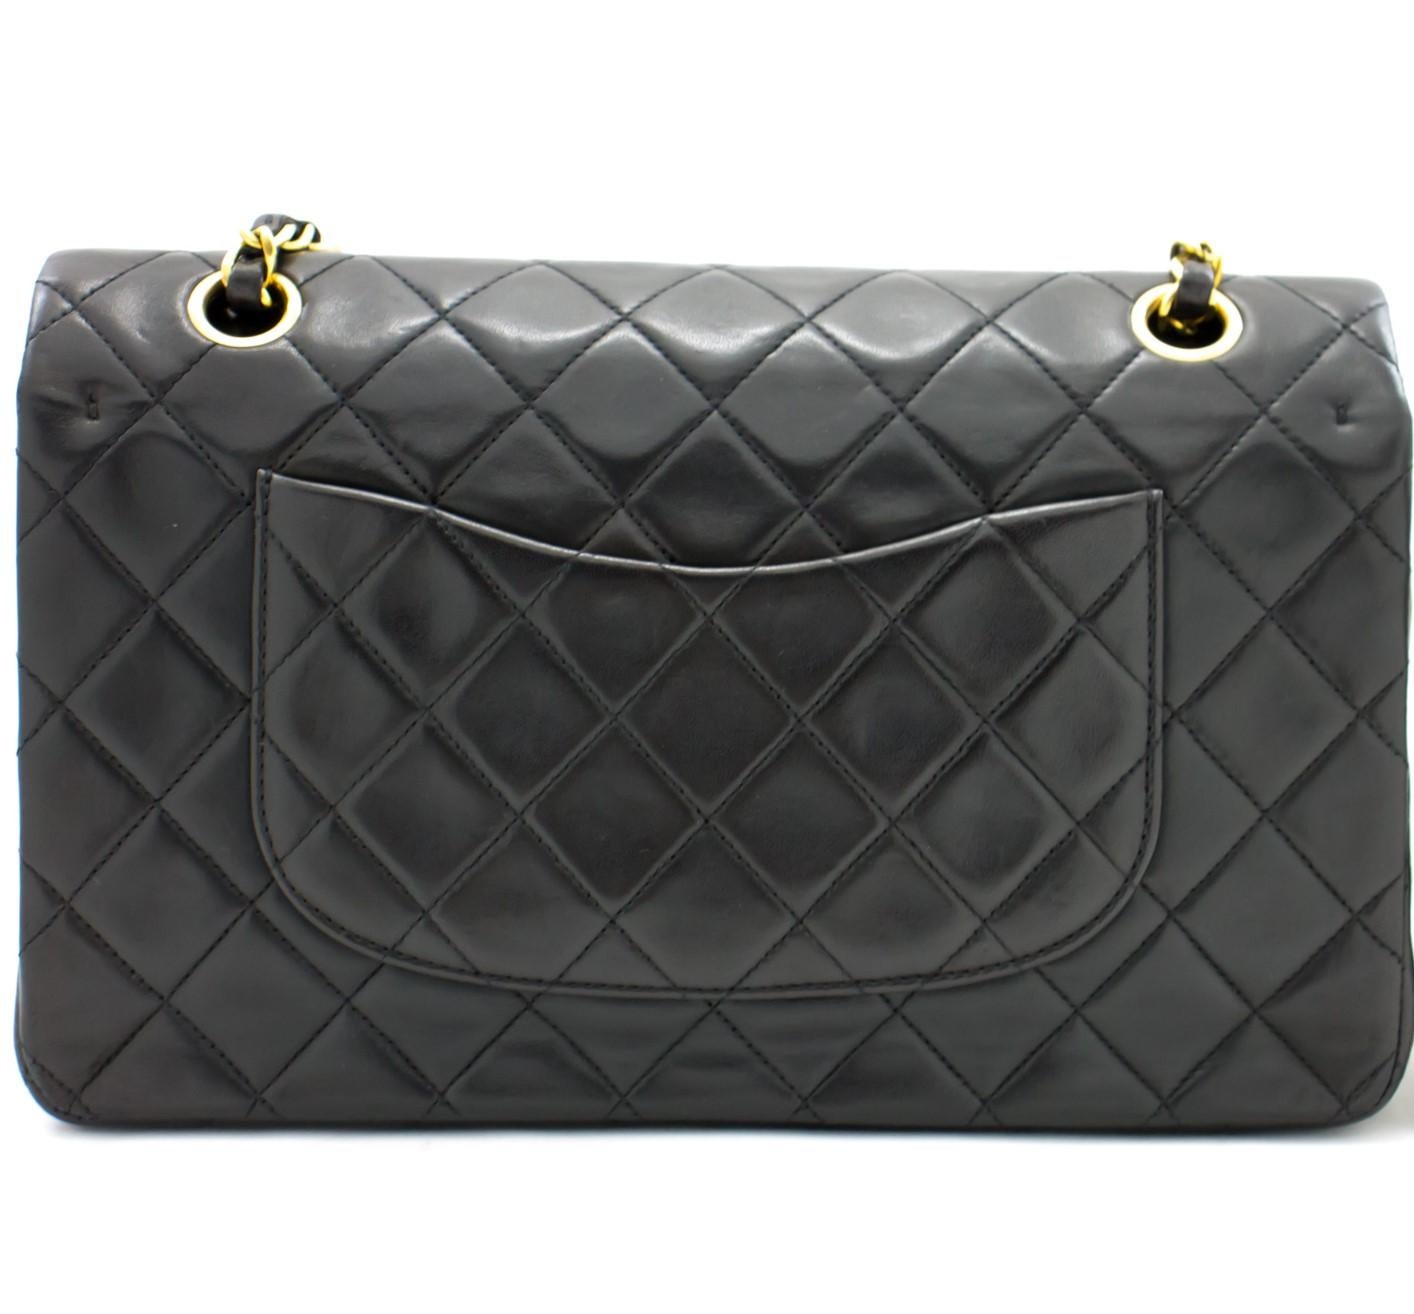 This iconic Chanel 10 inch bag from 1994 - 1996 is crafted from quilted black lambskin and features a double flap. On the front flap there is the classic CC logo twist lock and on the second flap a stud closure with one slip-in pocket. The inside